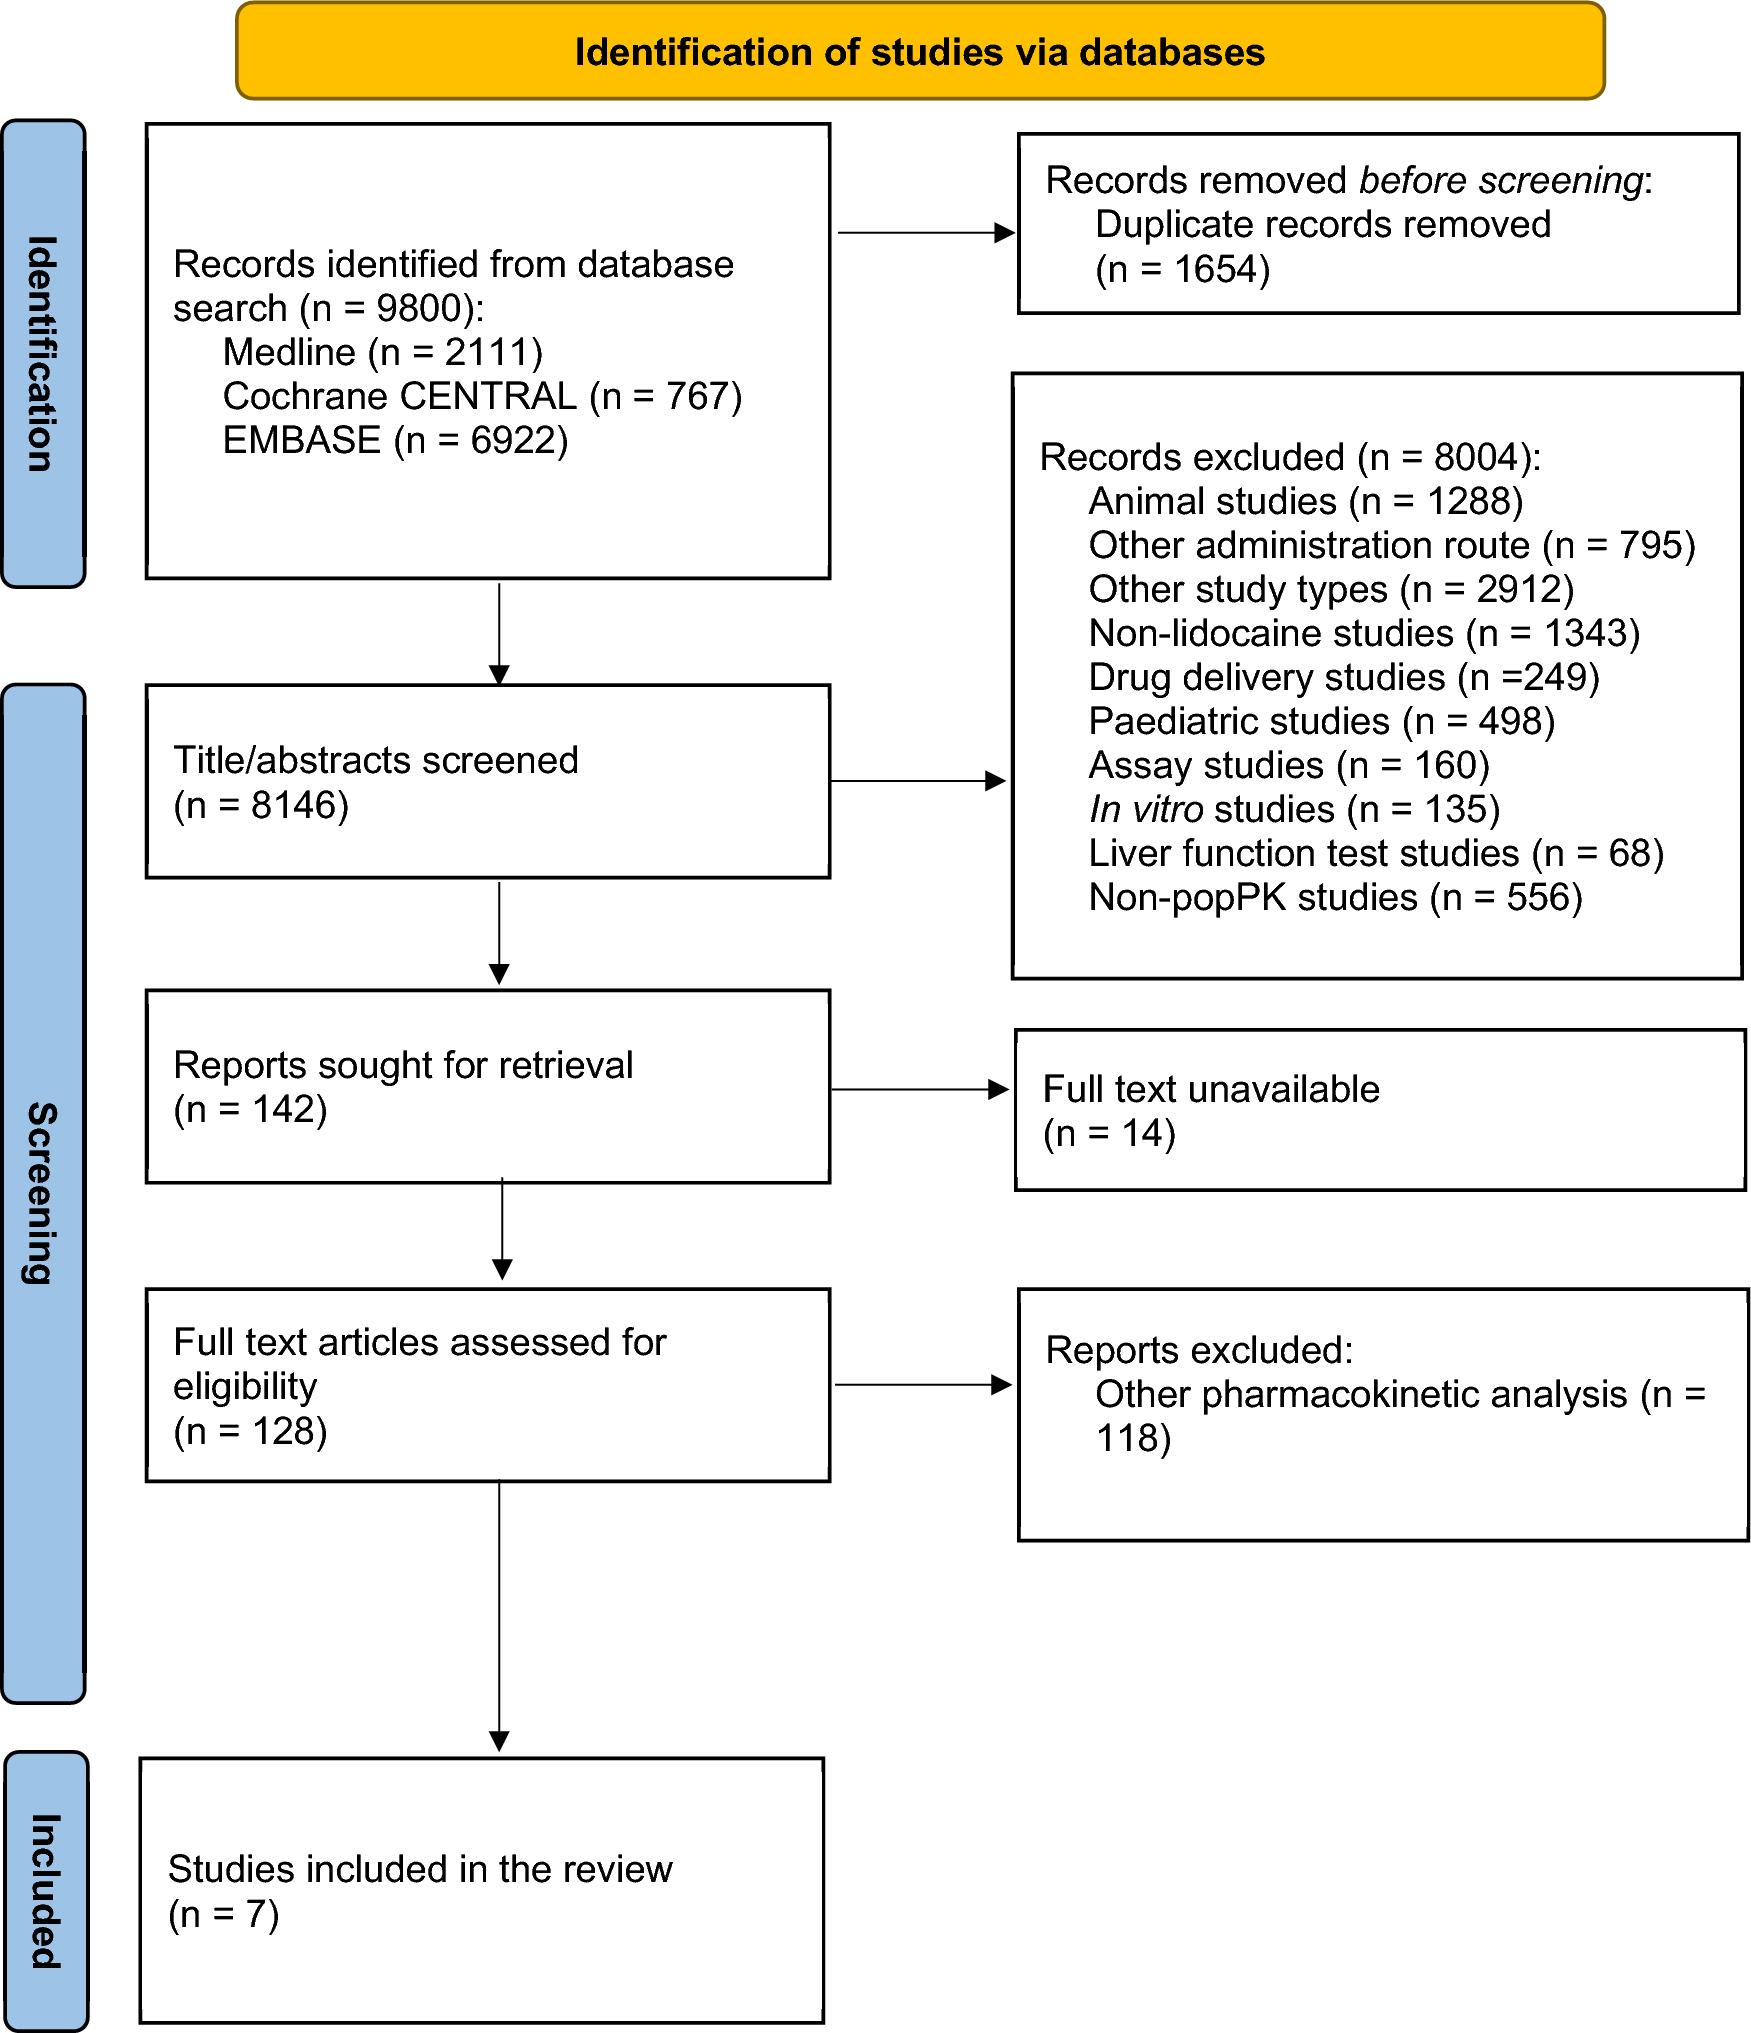 Population Pharmacokinetics of Intravenous Lidocaine in Adults: A Systematic Review